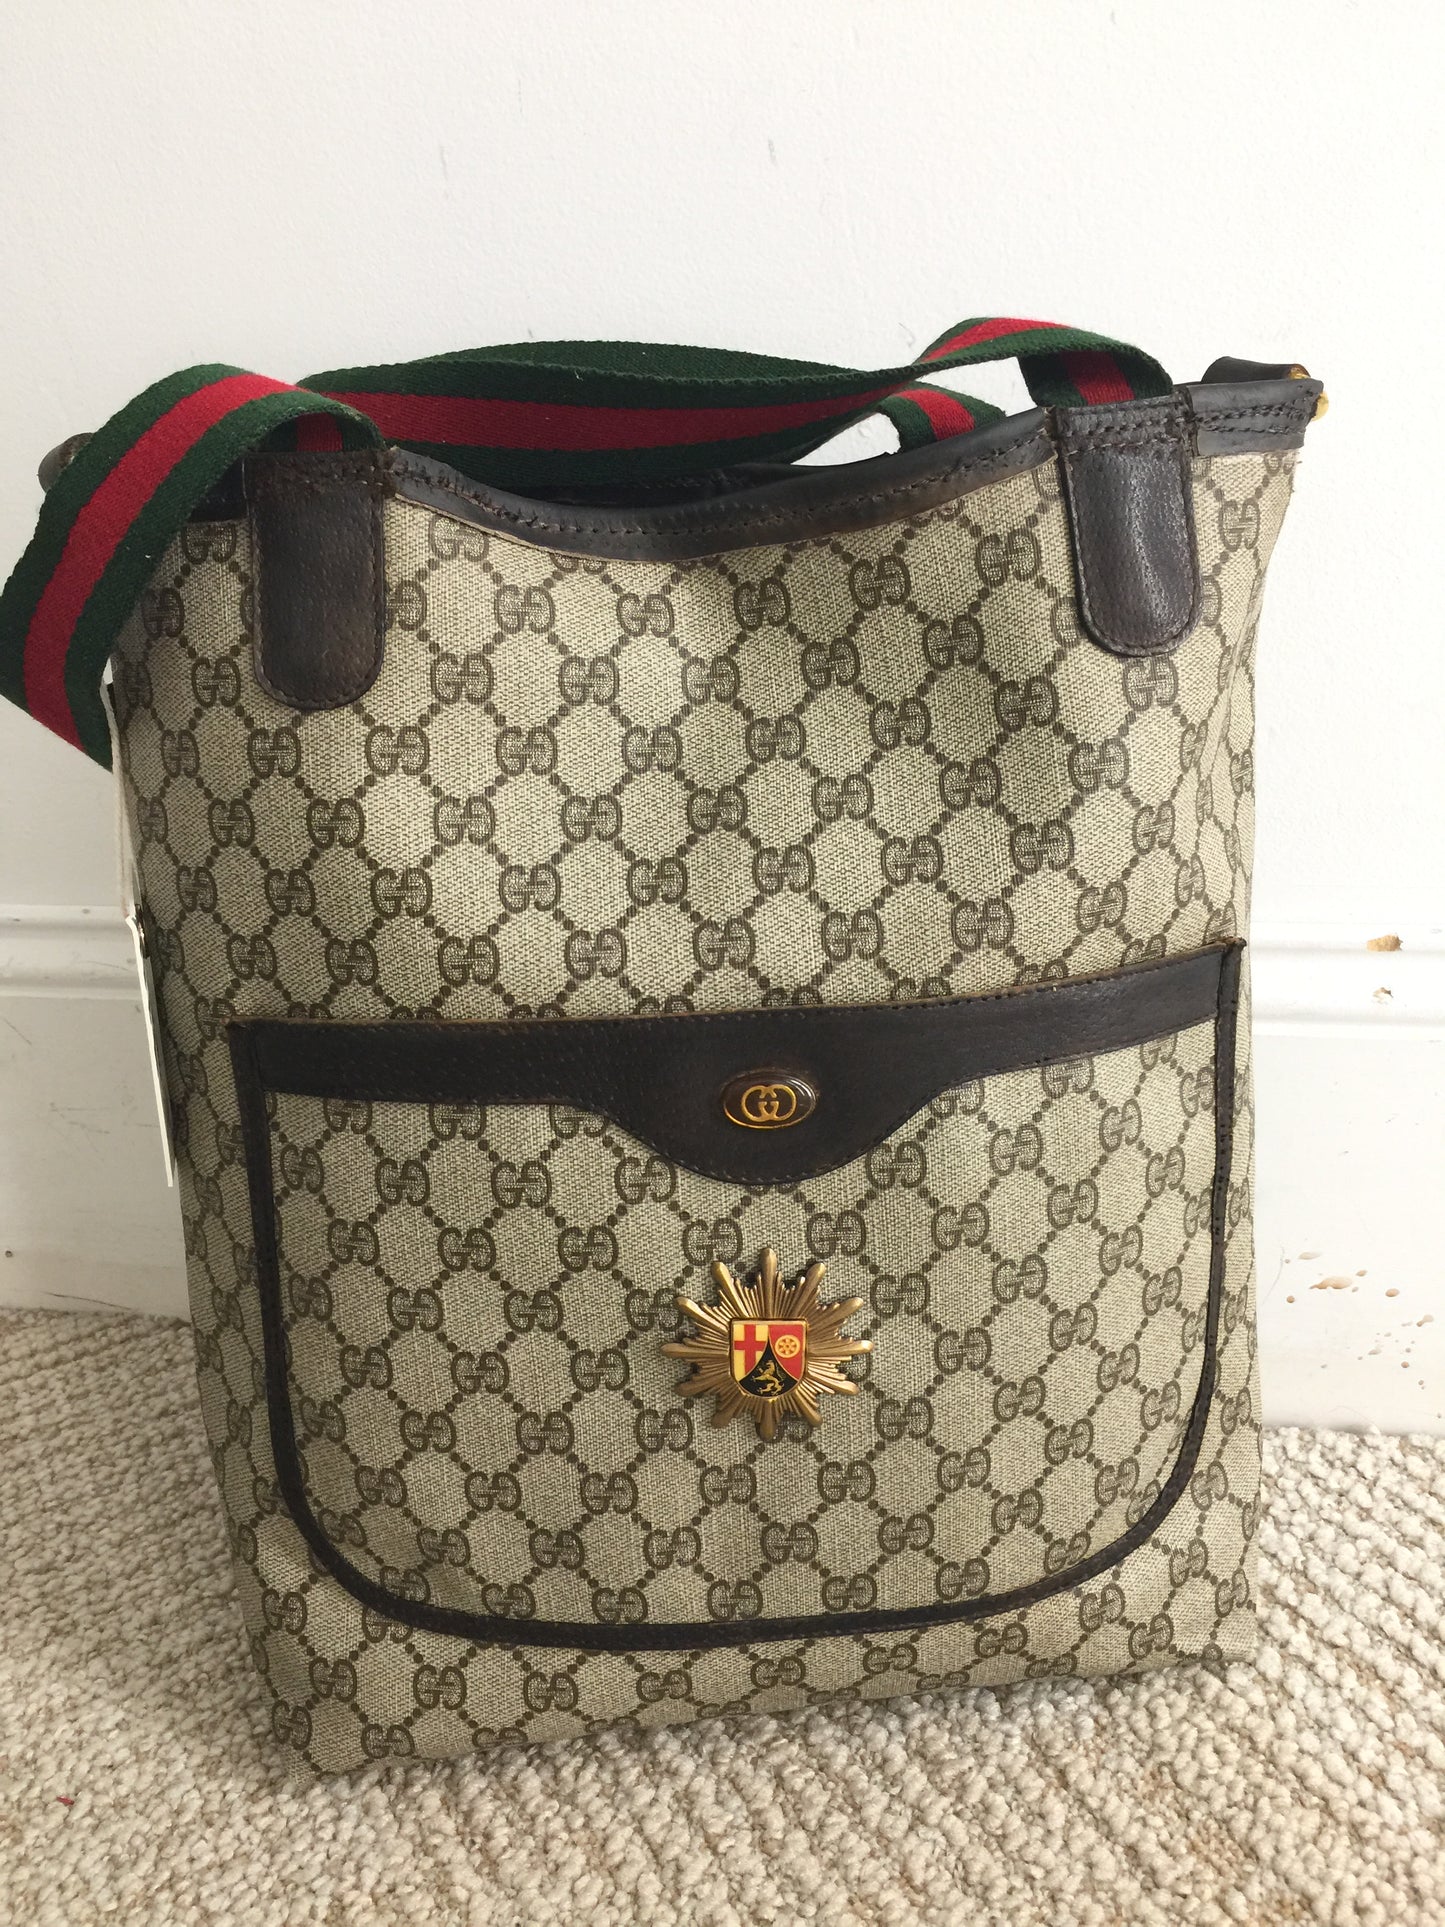 LS Upcycled GG Crest Pin Bag